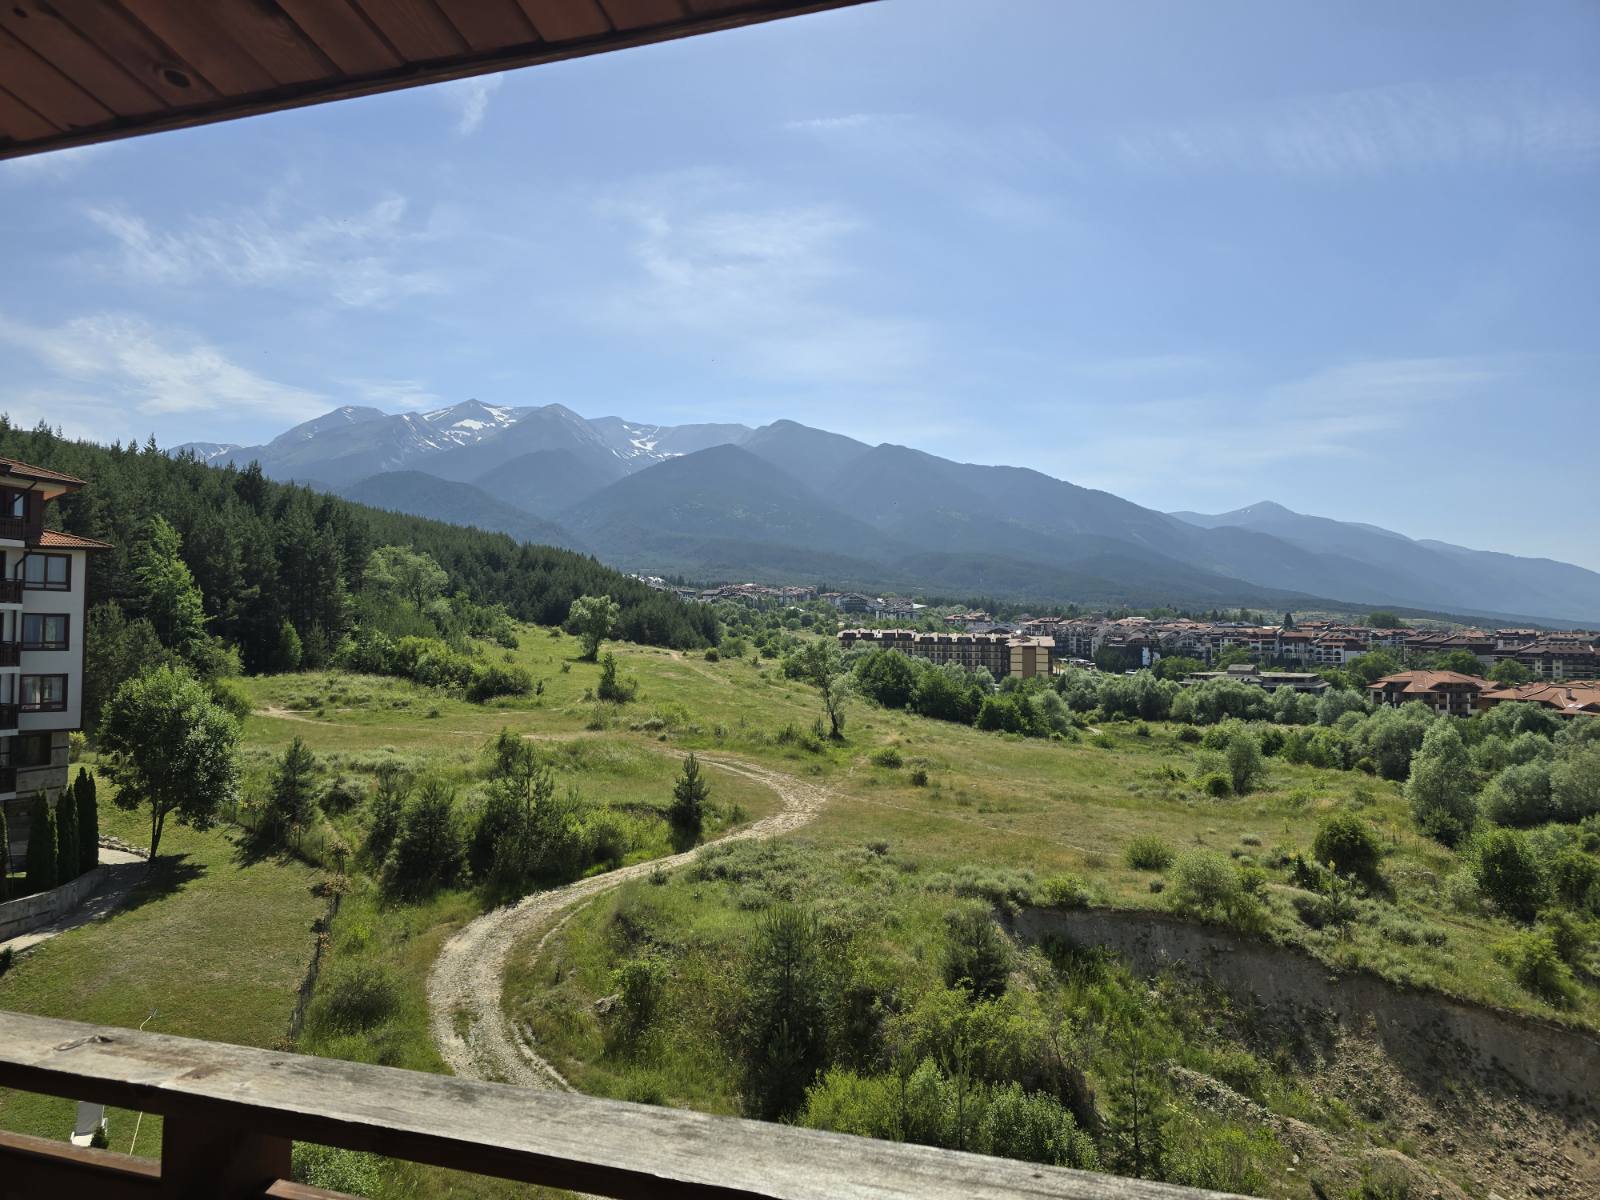 South-west studio with a terrace and a beautiful view of Pirin for sale in Bansko